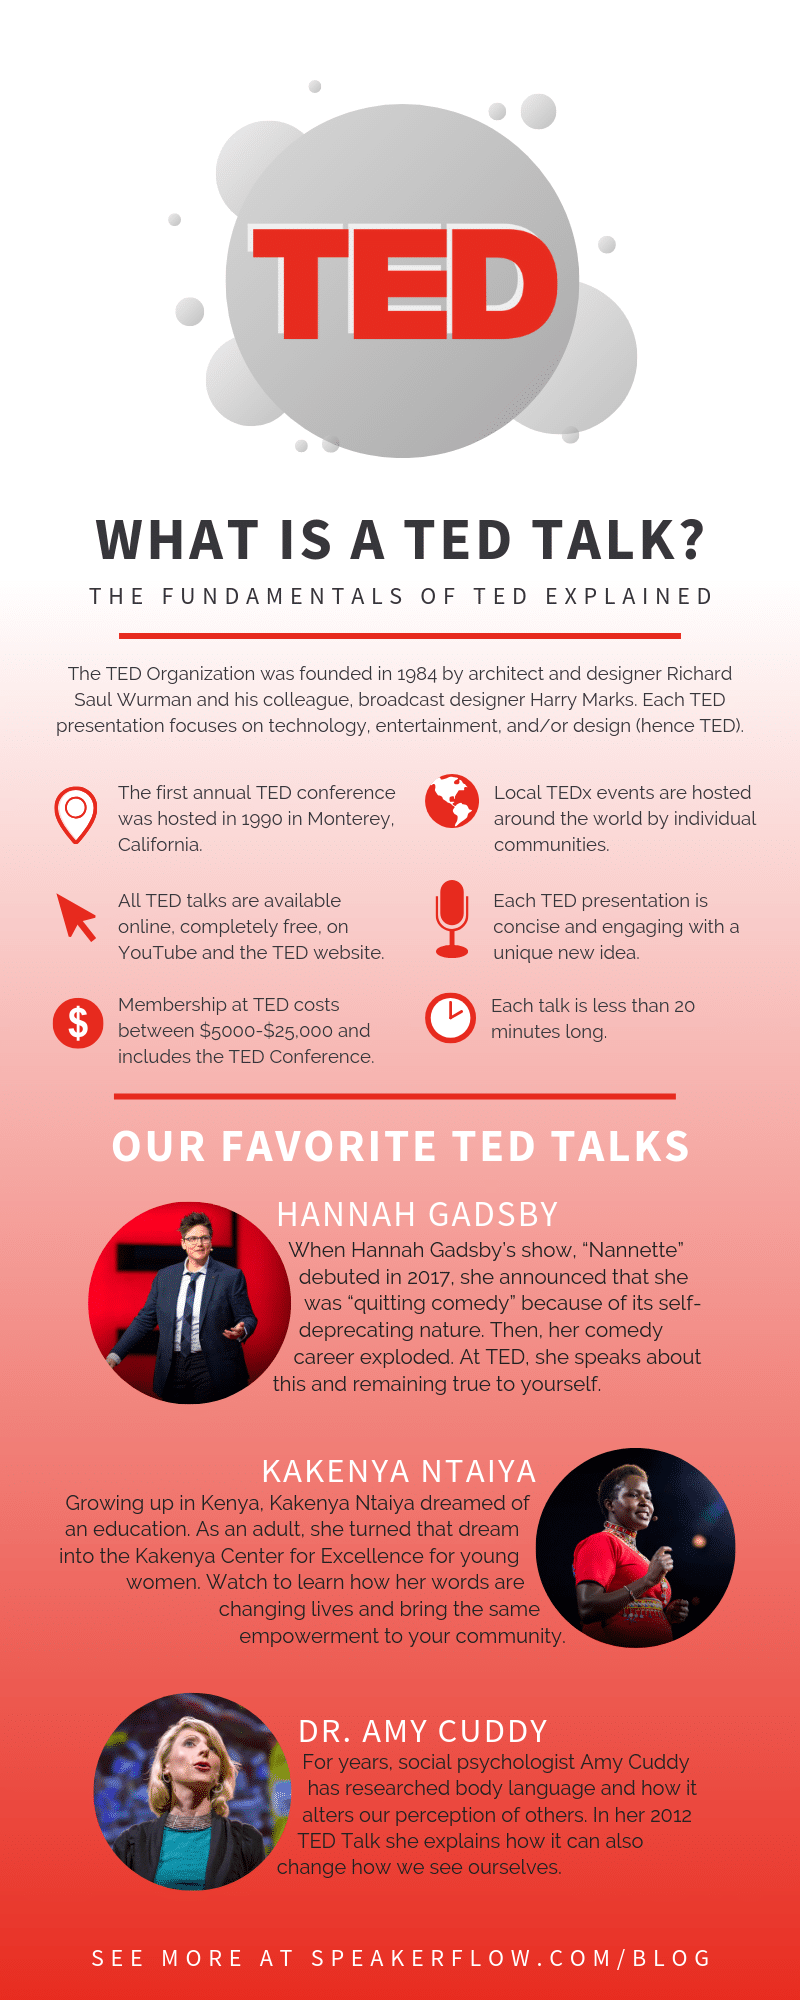 What Is A TED Talk? The Fundamentals of TED Explained